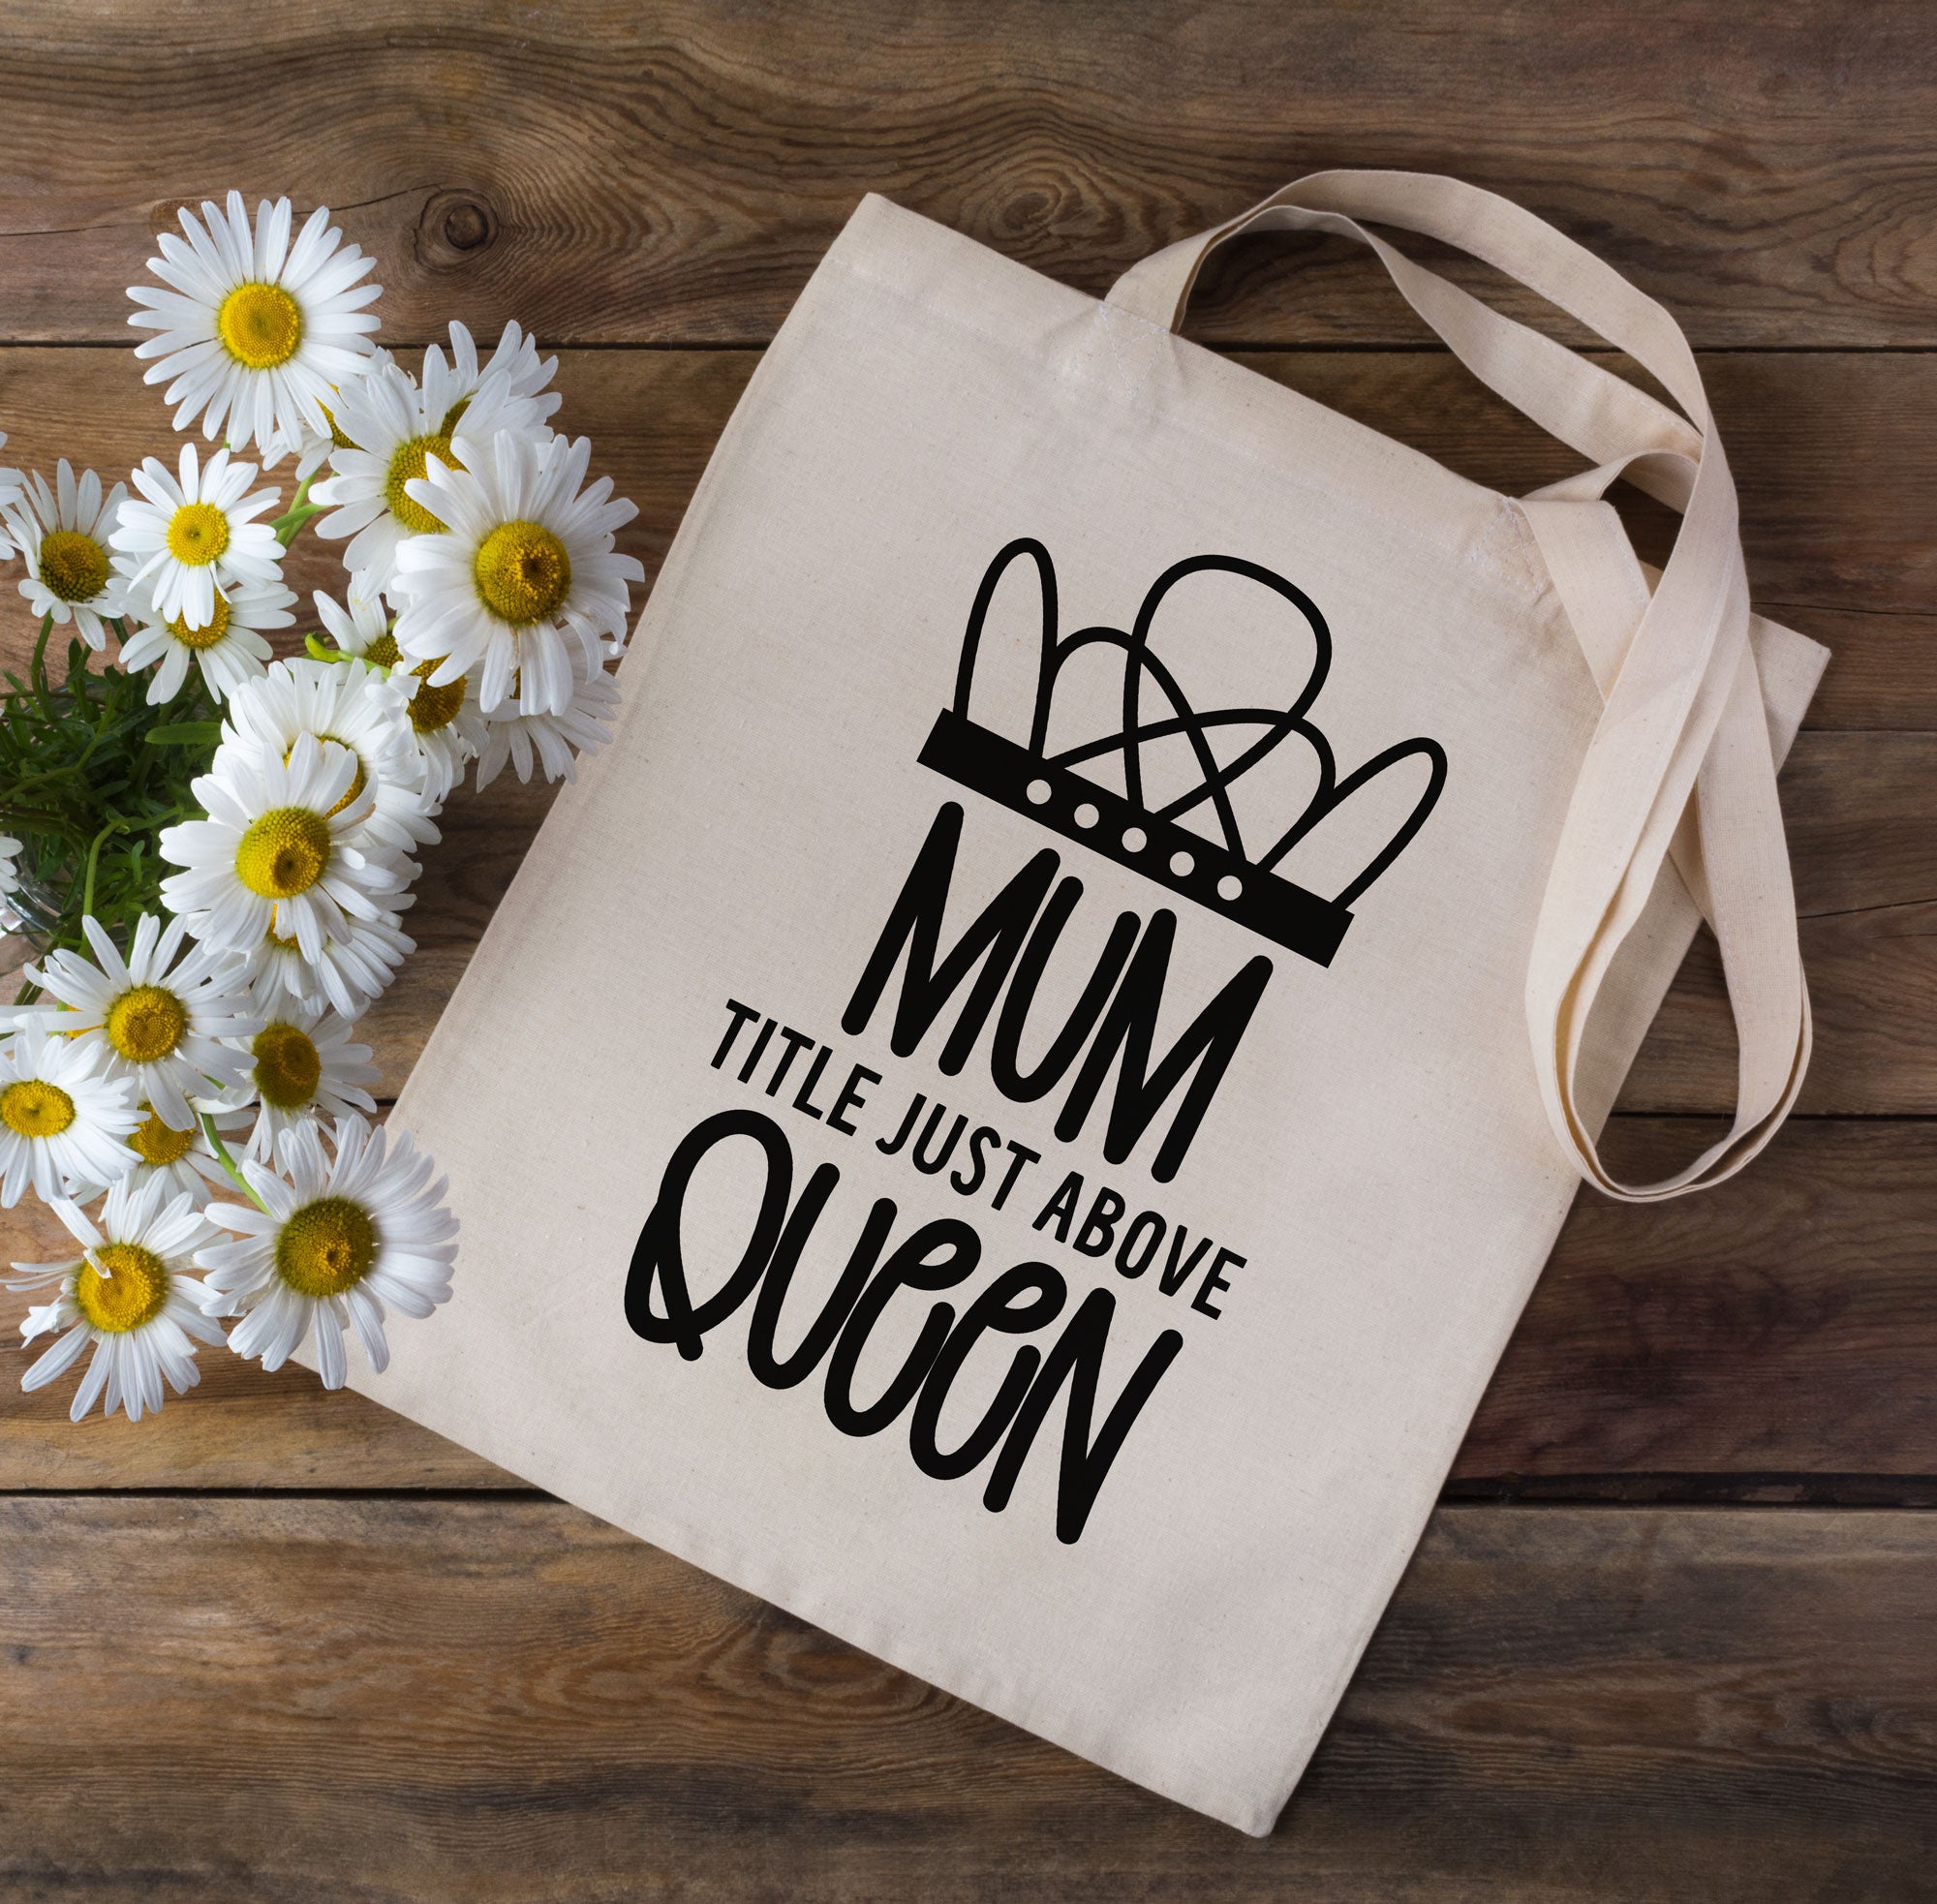 Mum Title Just Above Queen Tote Bag